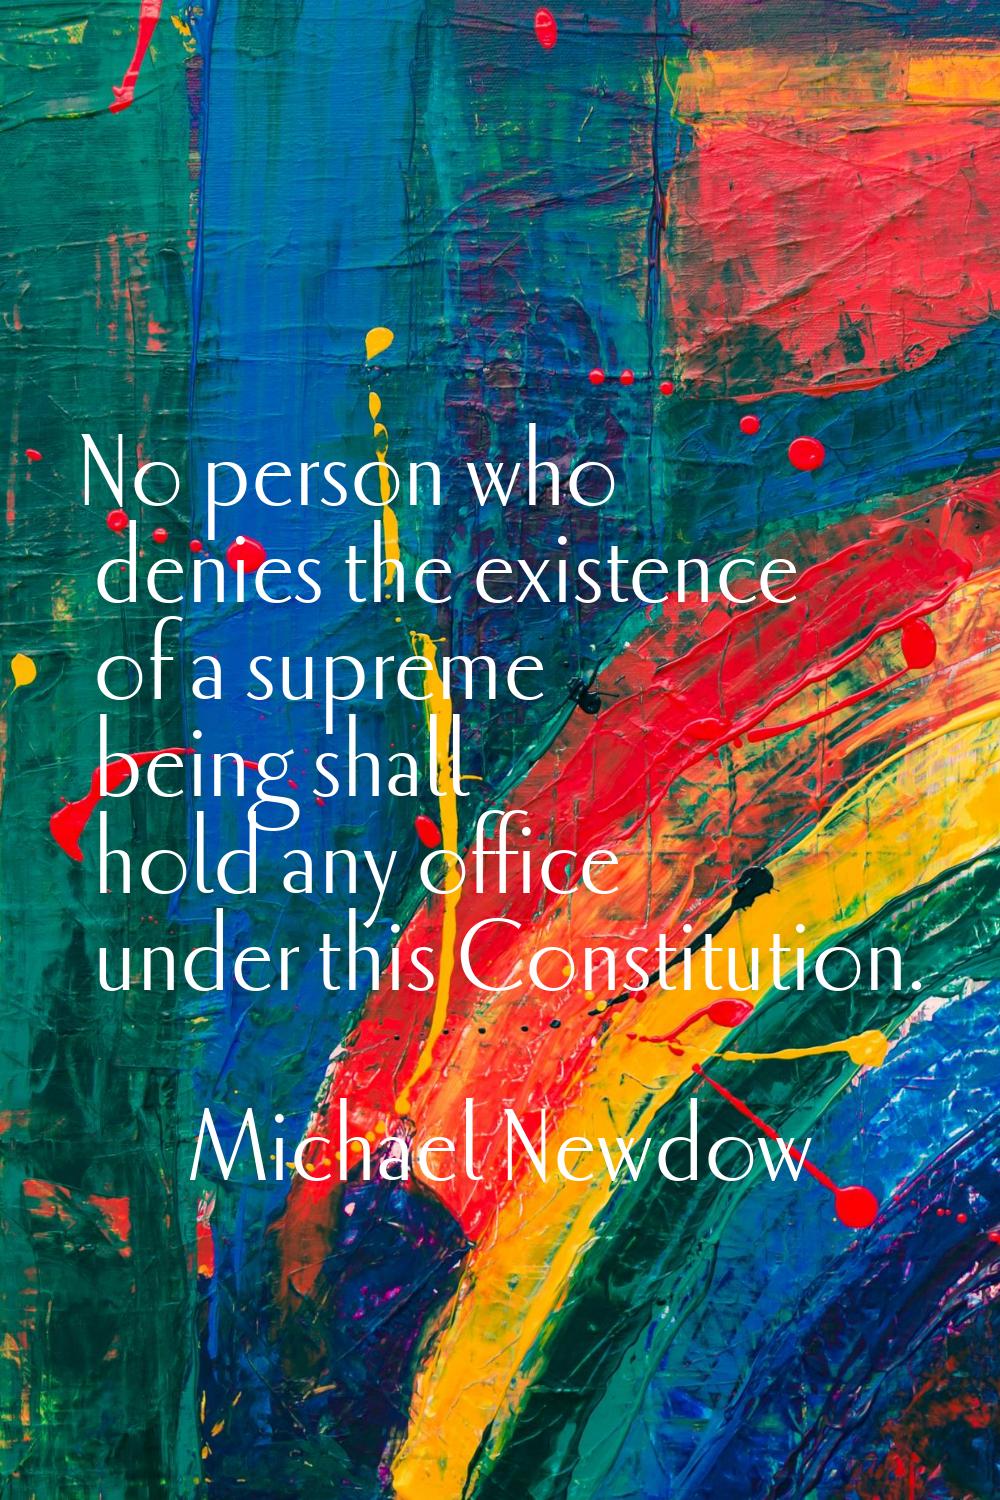 No person who denies the existence of a supreme being shall hold any office under this Constitution